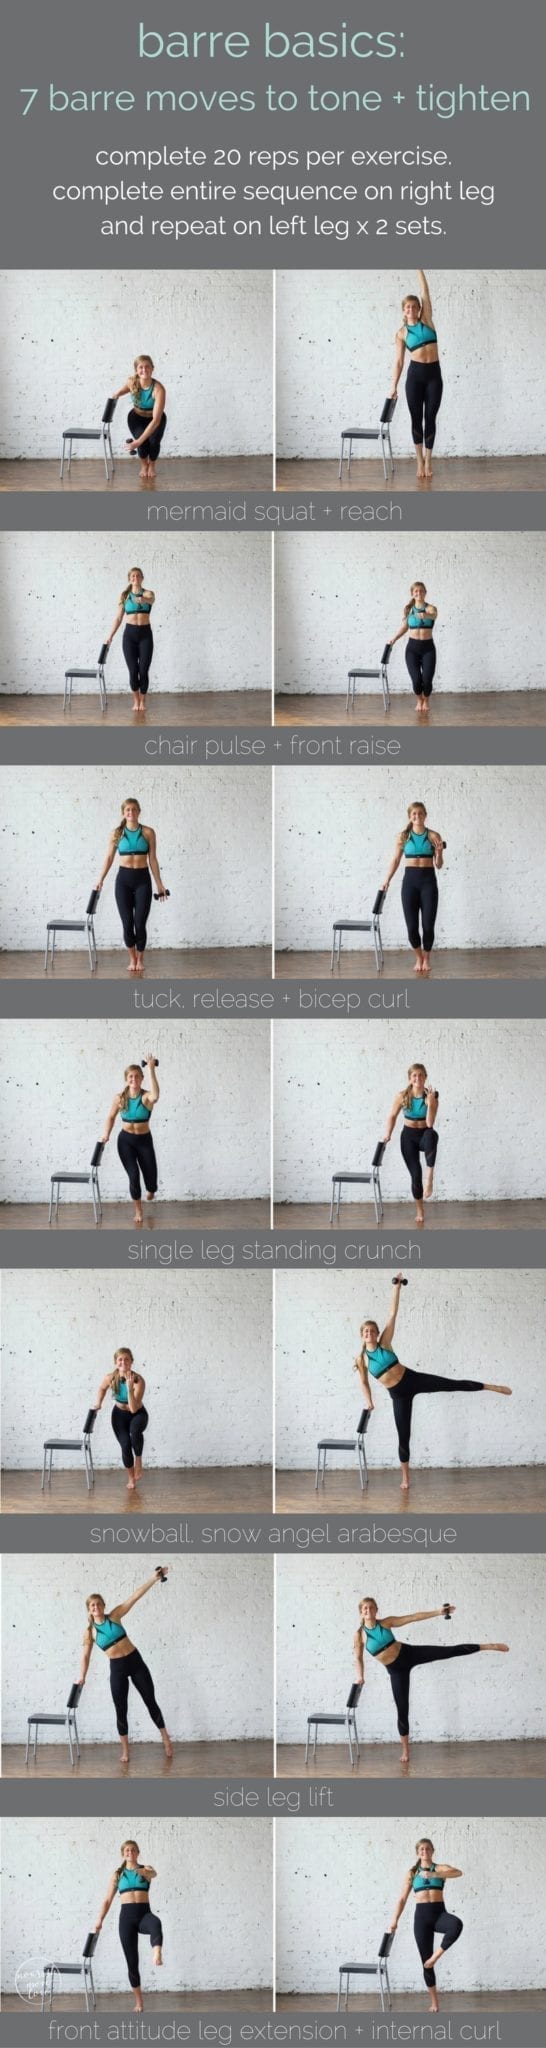 barre basics: 7 barre moves to tone + tighten | at home barre workout | beginner barre workout